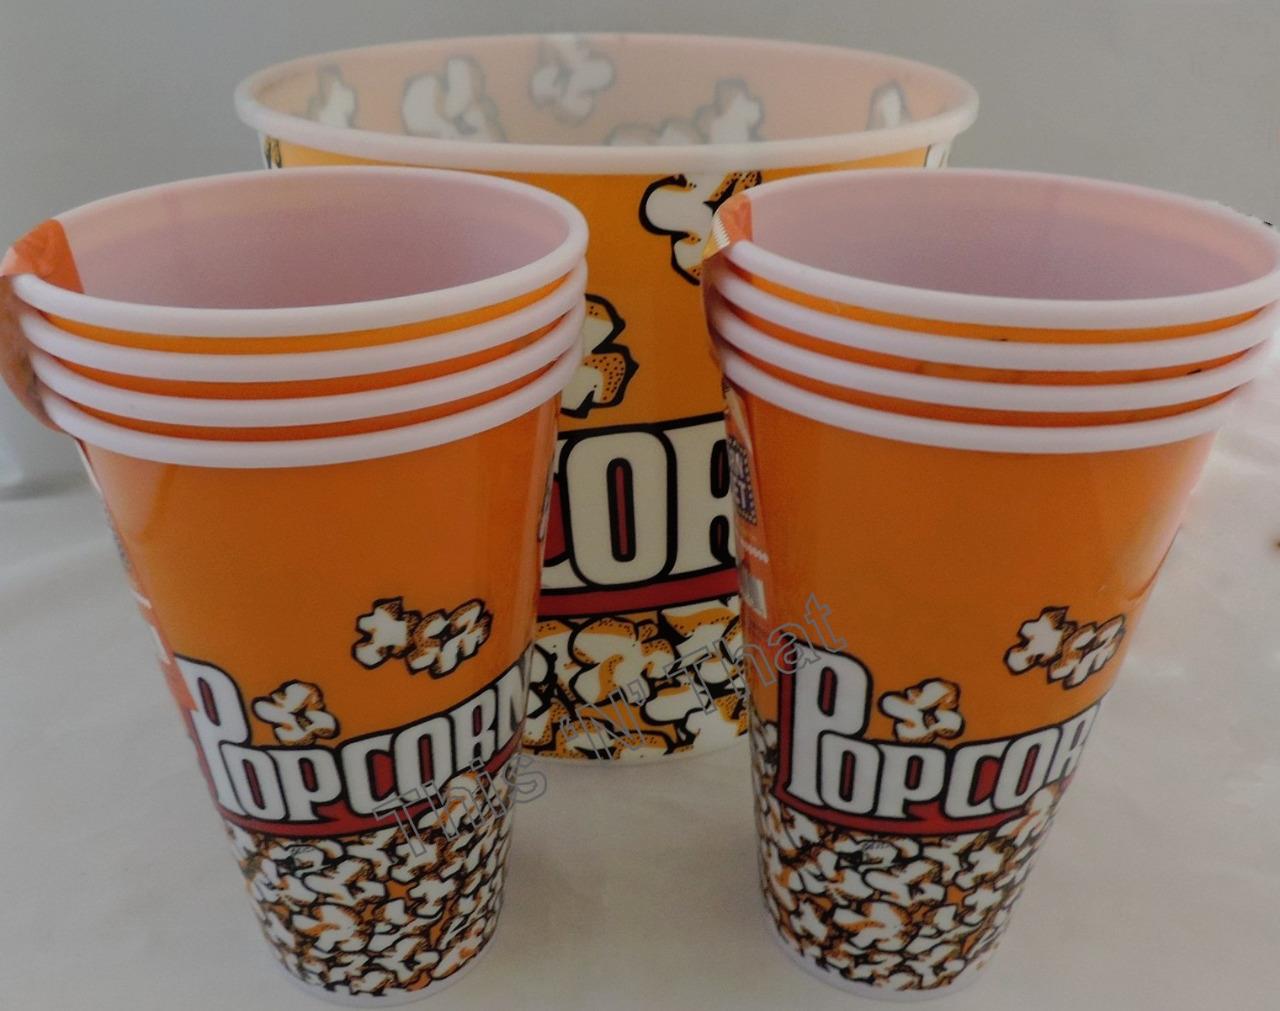 NEW Popcorn Holders Bowl 5 or 9 piece set Plastic Containers Reusable Tub Bucket | eBay1280 x 1011